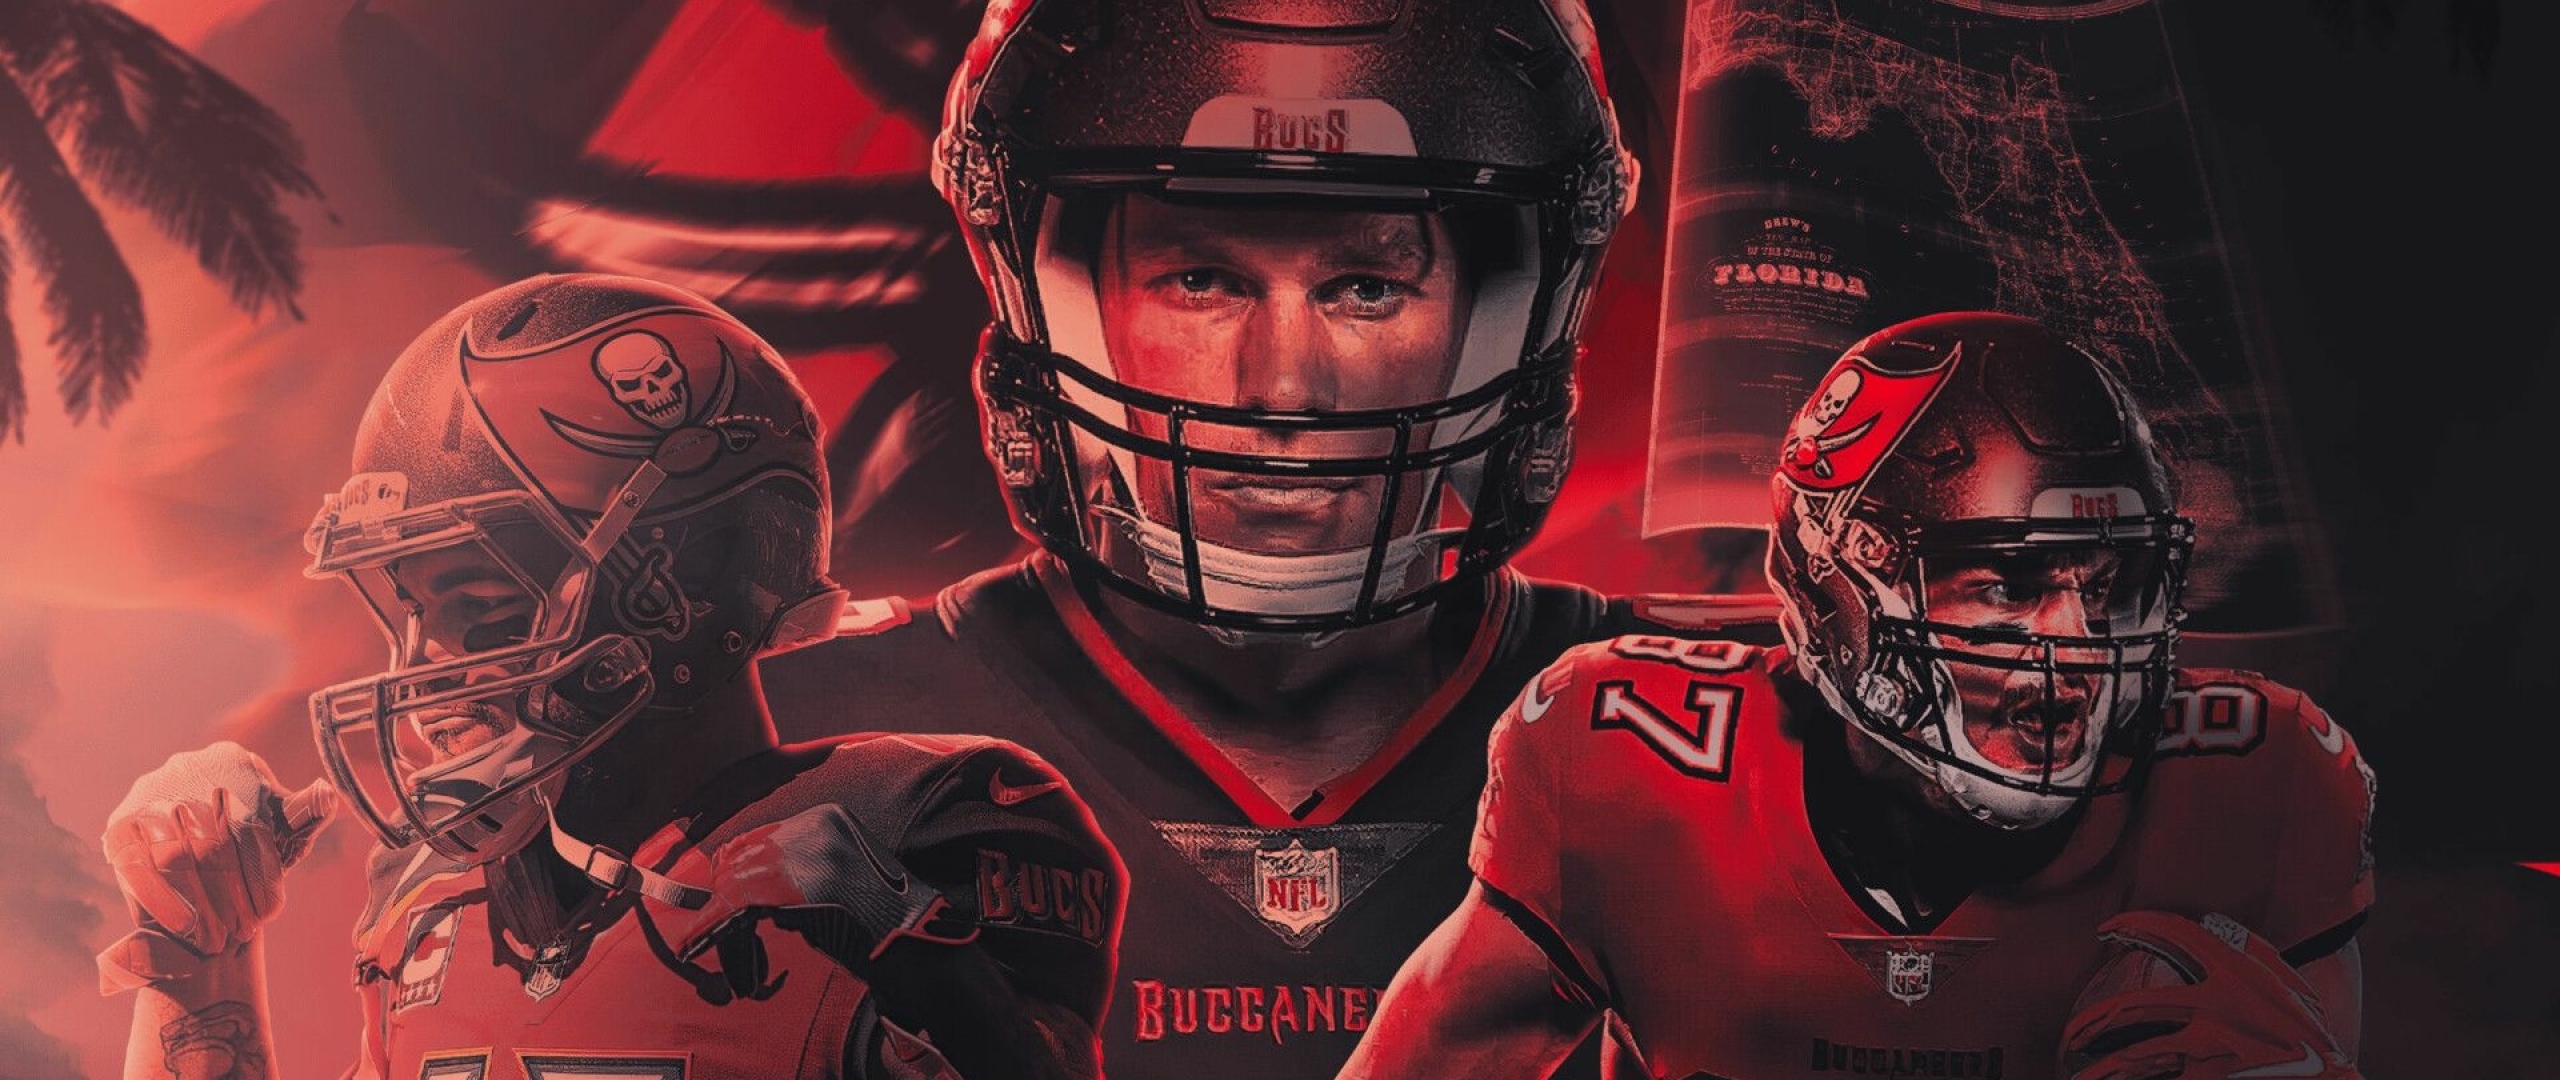 If anyone likes a Brady wallpaper I created this for a request Enjoy  r buccaneers